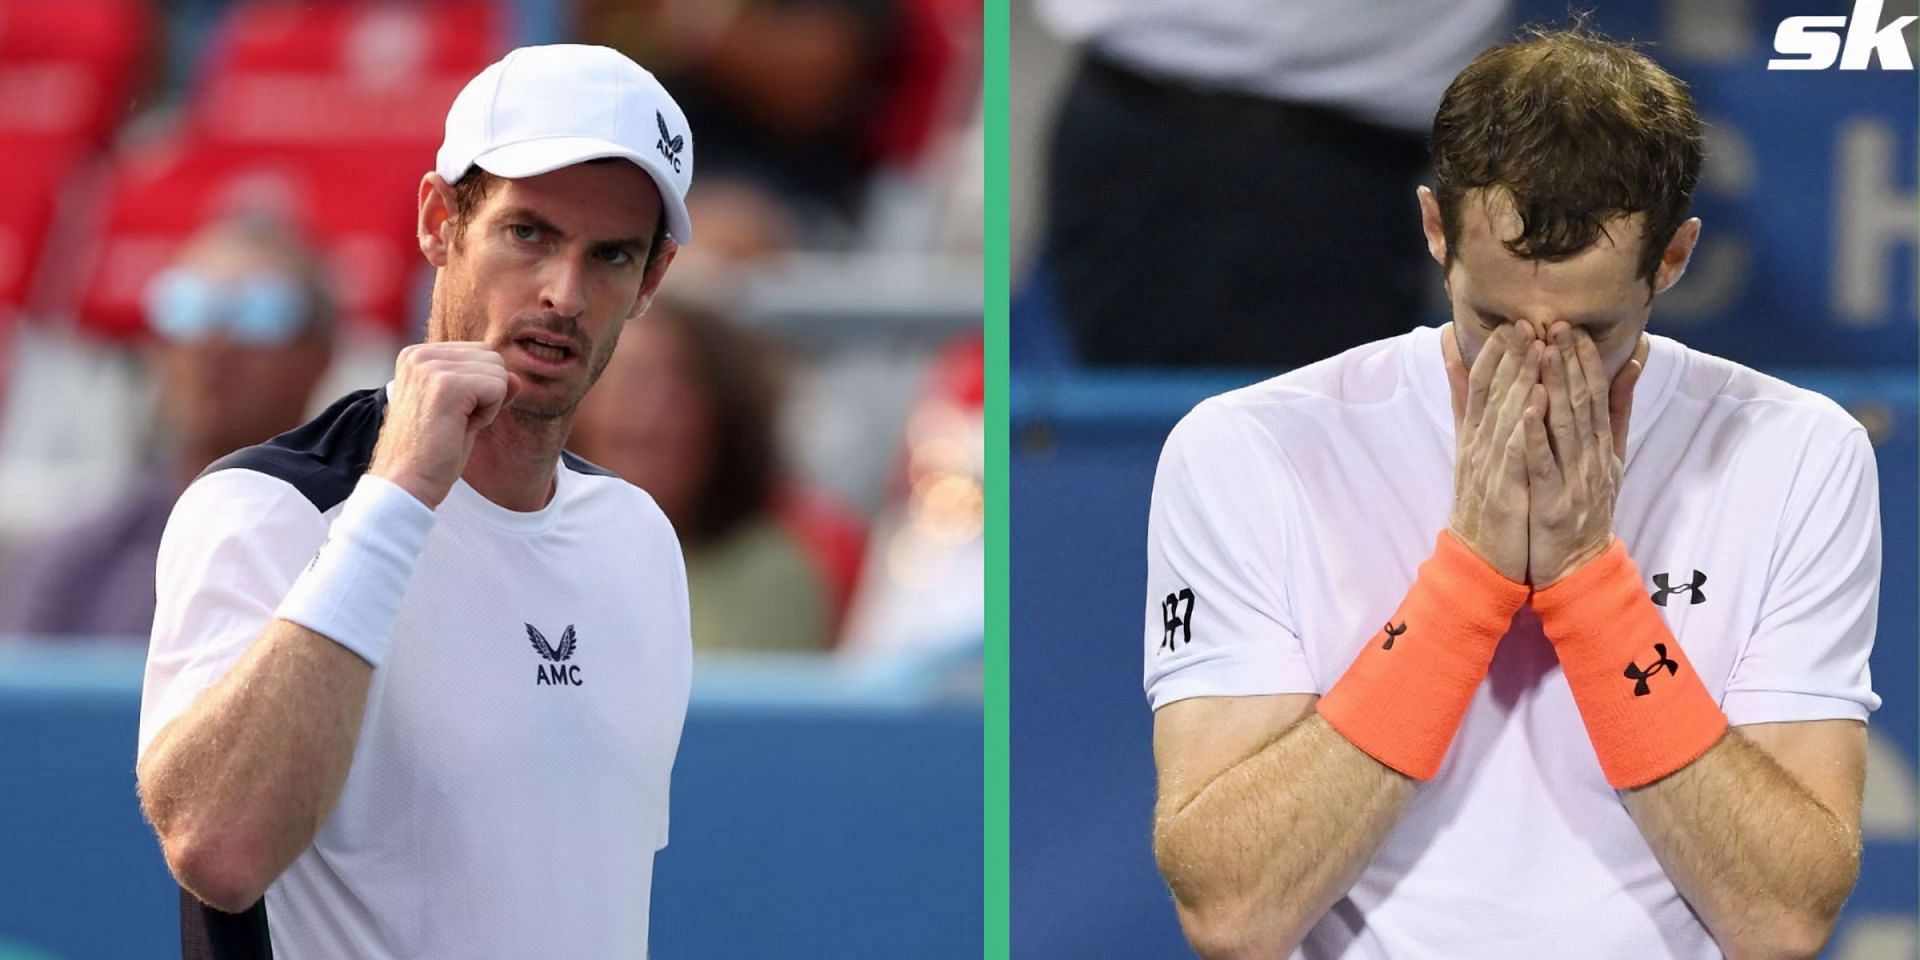 Andy Murray at Citi Open 2023 (L) and him at Citi Open 2018 (R)